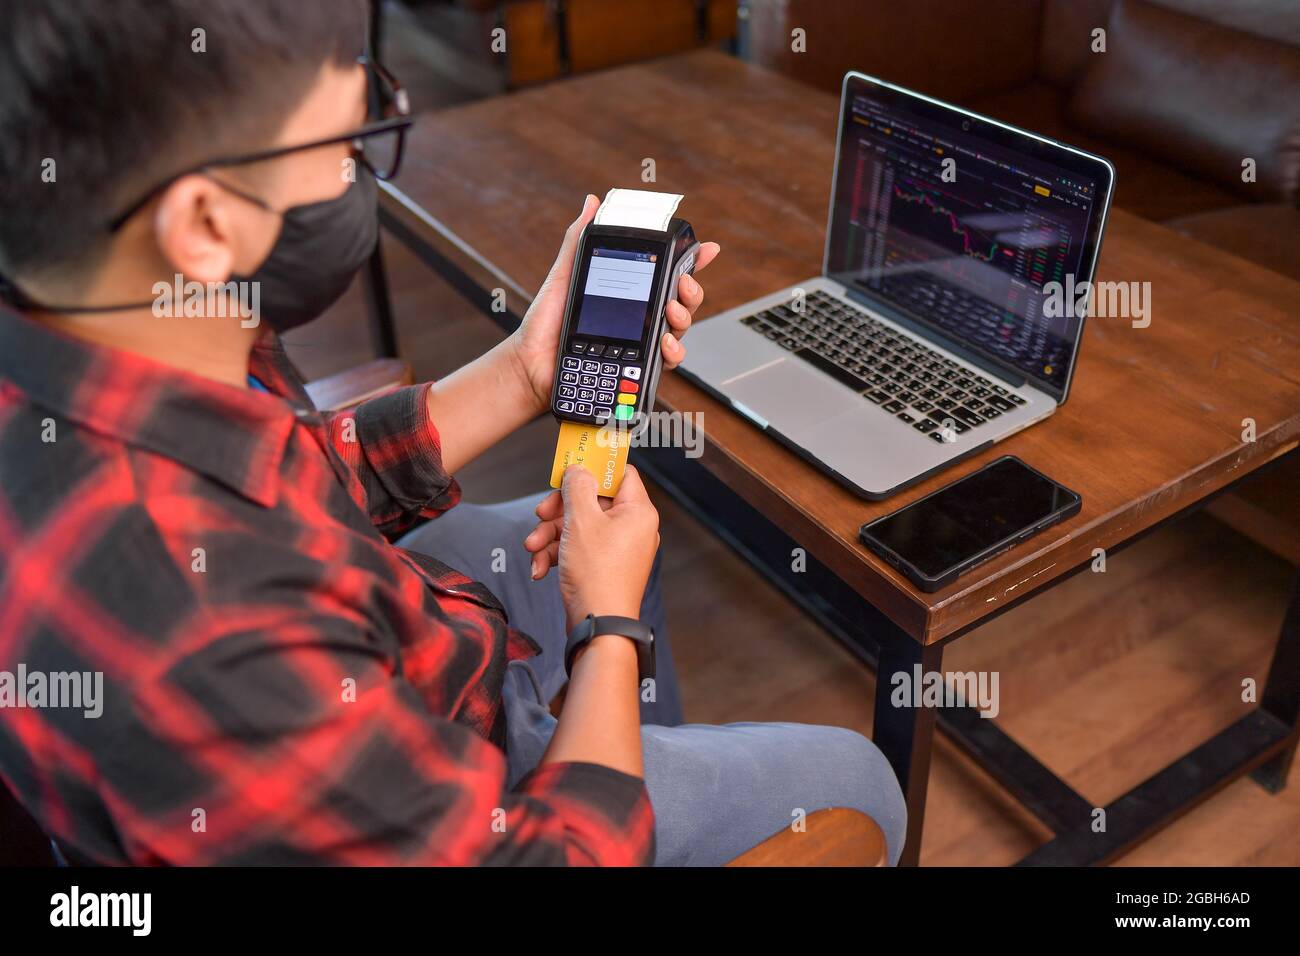 Man sitting at a table making a contactless payment on a credit card reader Stock Photo